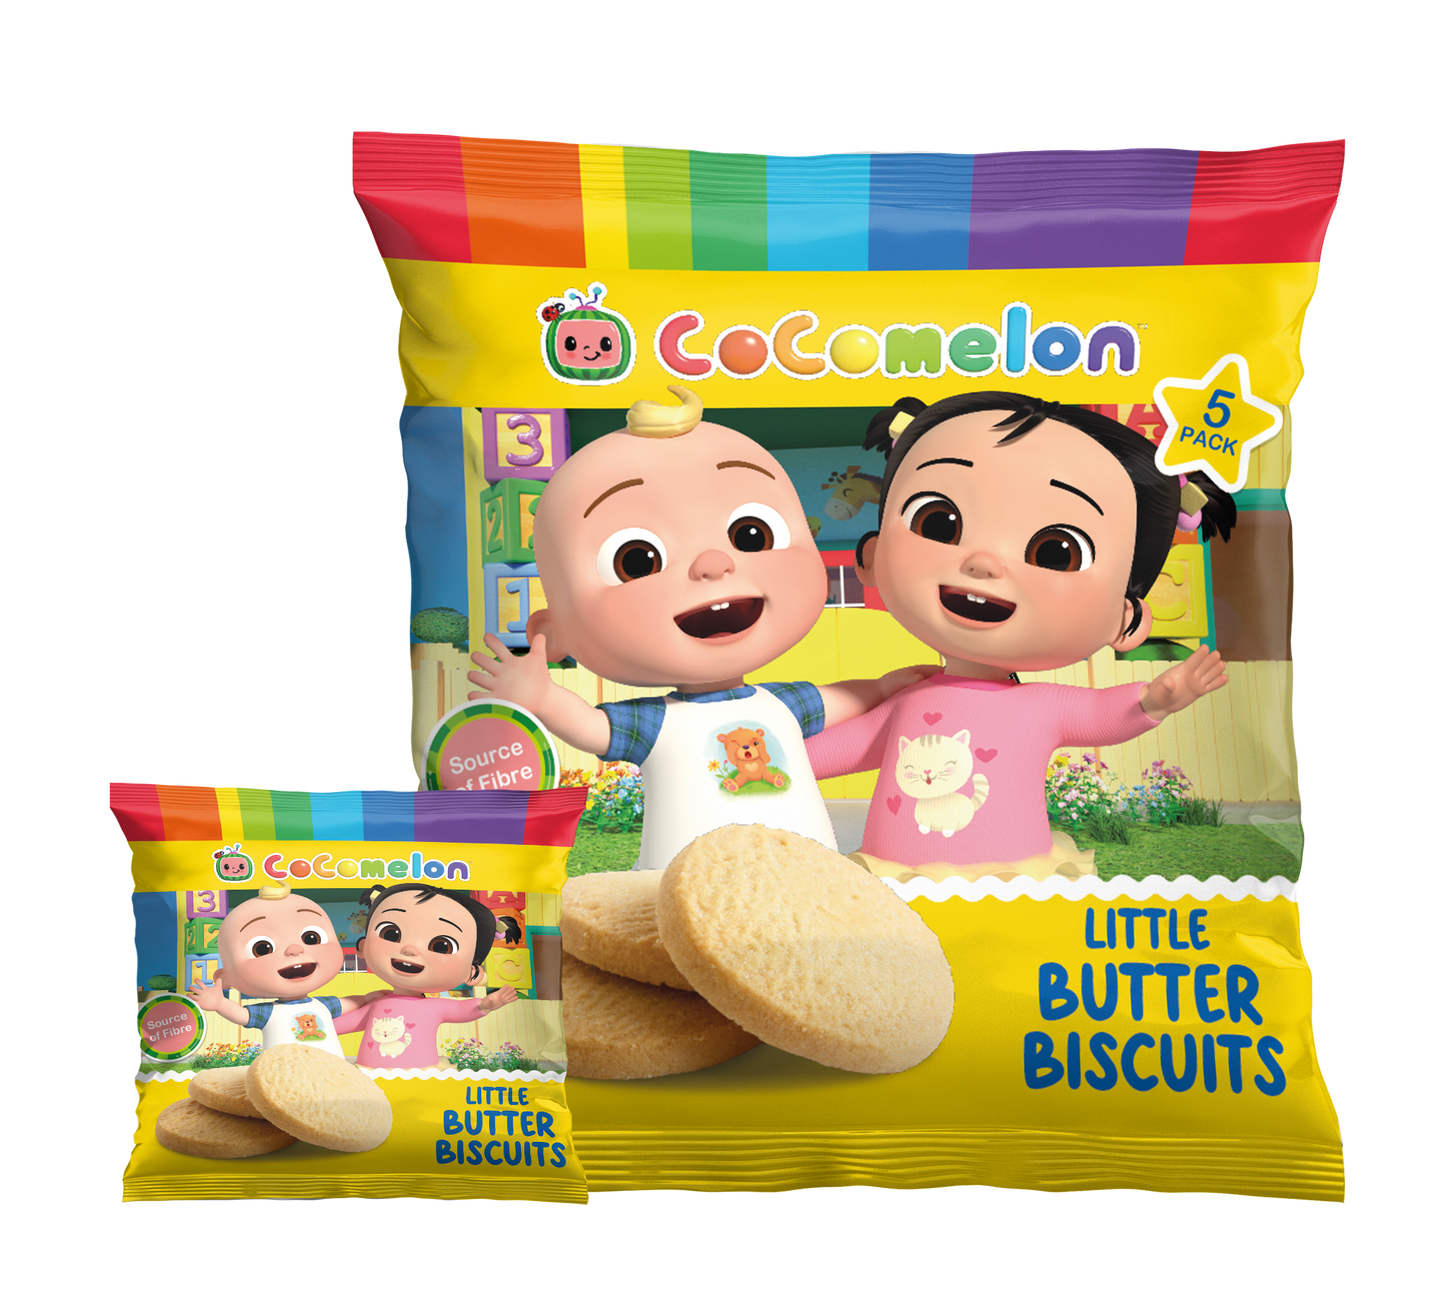 Cocomelon Little Butter Biscuits